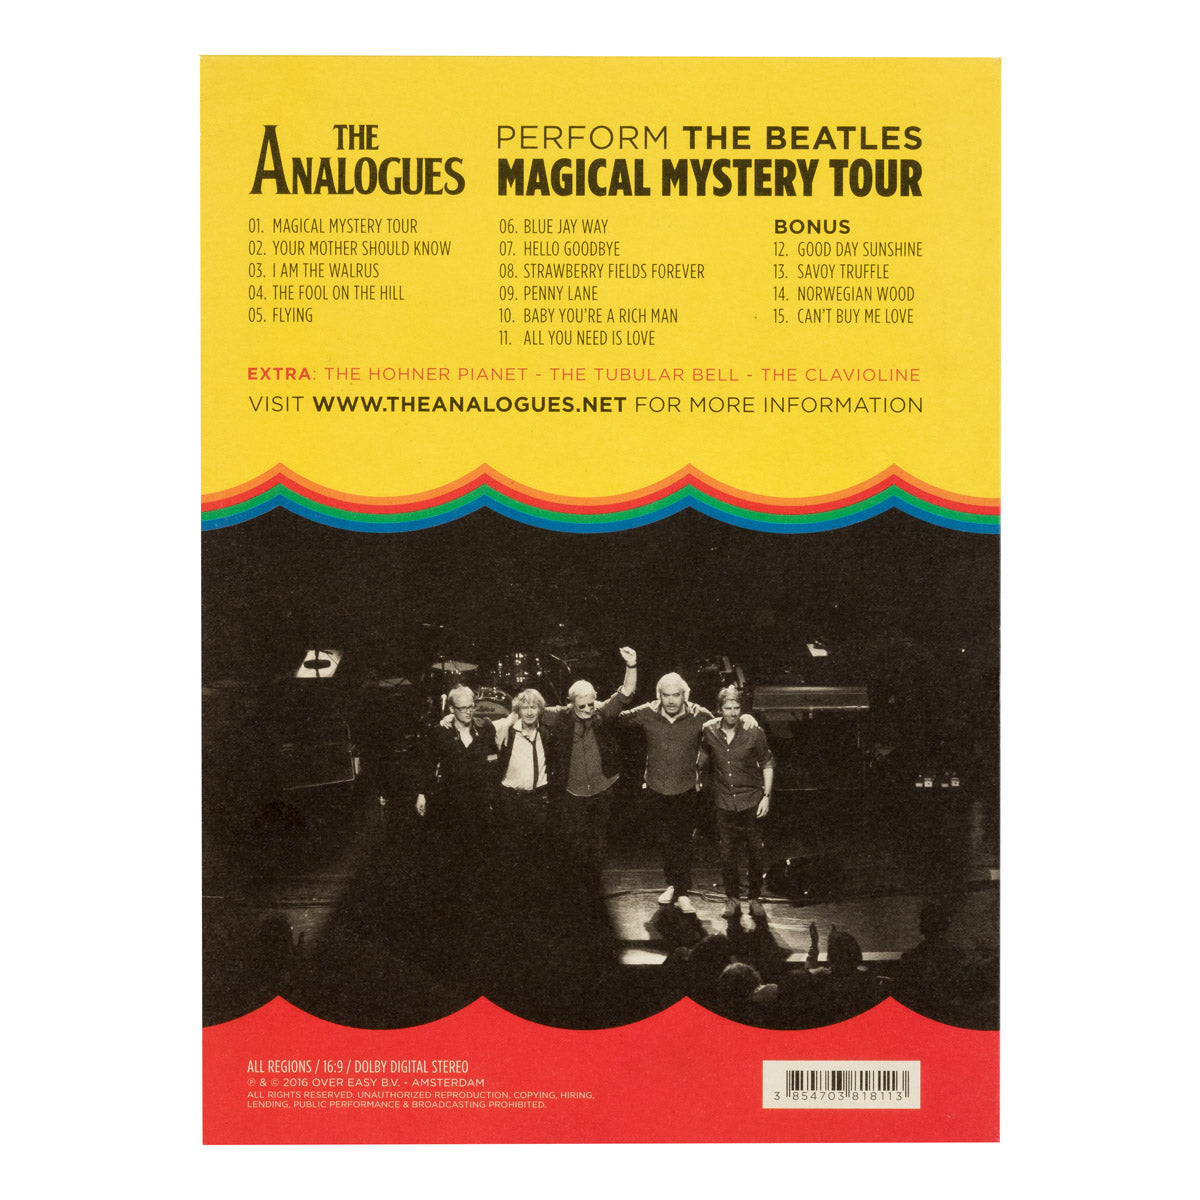 The Analogues | DVD - Magical Mystery Tour Live Concert | Back